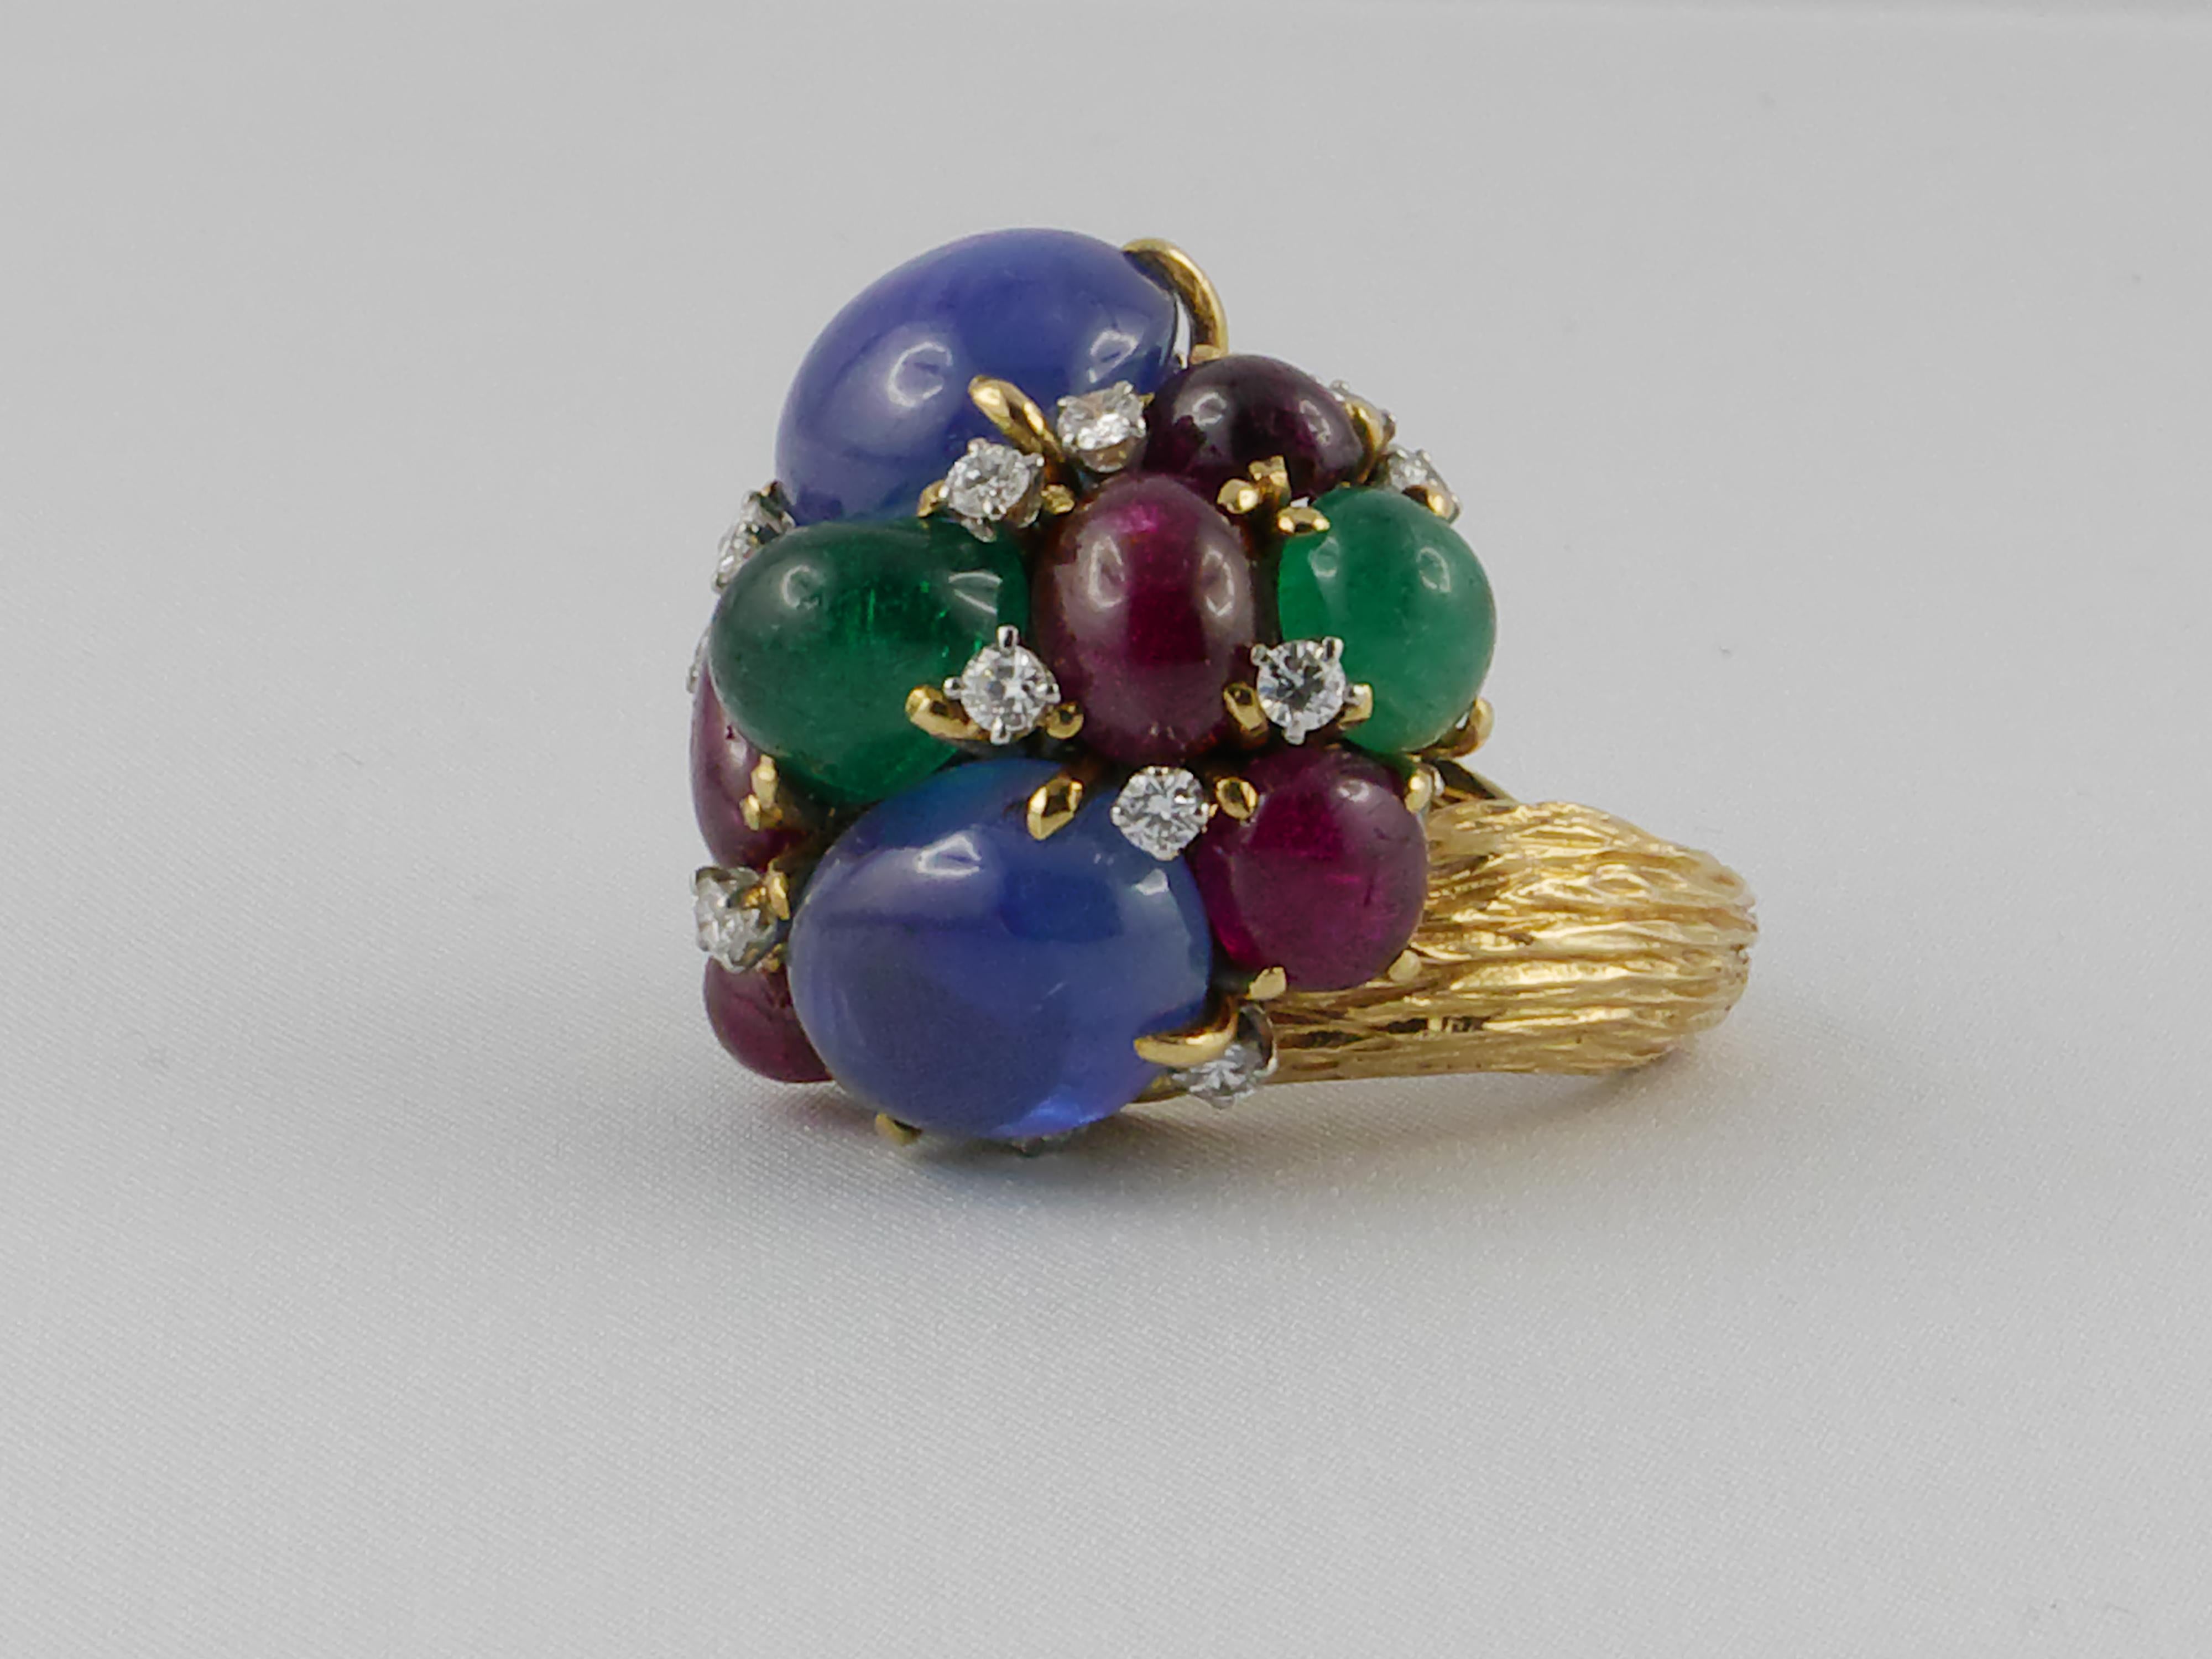 David Webb dramatic color contrast cocktail ring in18 karat yellow gold and platinum with  6 cabochon Rubies, 2 wide cabochon Sapphires,  3  cabochon Emeralds and diamonds, weighing a total of 24 Grams.
Size: 6 1/4 – Resizable

In case of return of